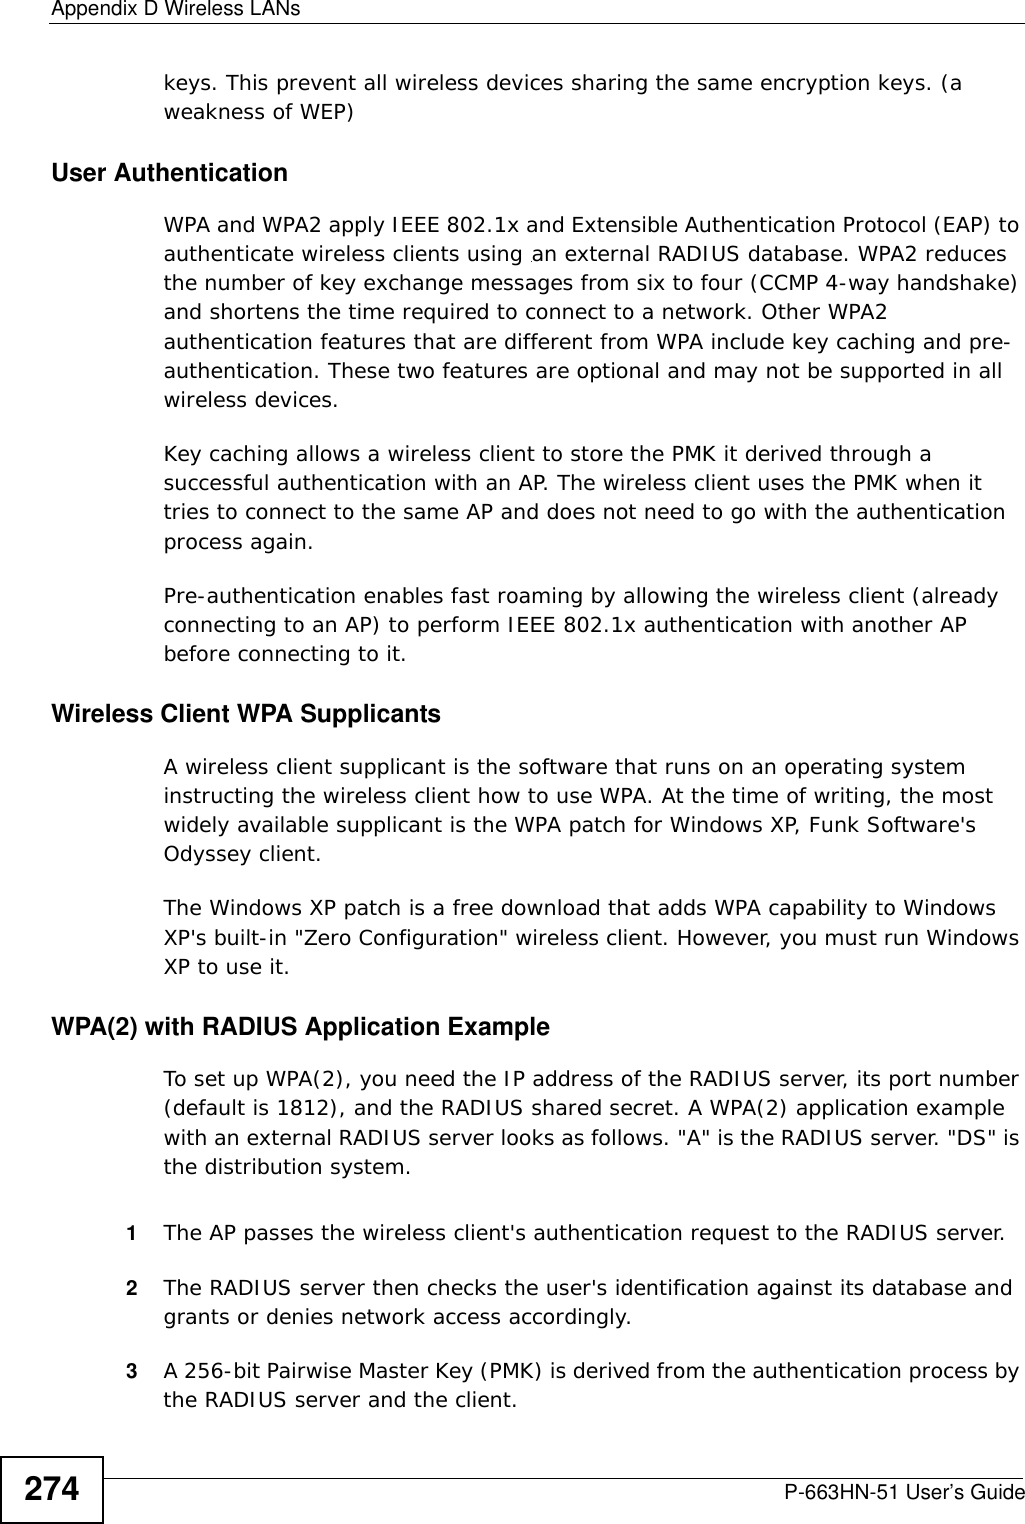 Appendix D Wireless LANsP-663HN-51 User’s Guide274keys. This prevent all wireless devices sharing the same encryption keys. (a weakness of WEP)User Authentication WPA and WPA2 apply IEEE 802.1x and Extensible Authentication Protocol (EAP) to authenticate wireless clients using an external RADIUS database. WPA2 reduces the number of key exchange messages from six to four (CCMP 4-way handshake) and shortens the time required to connect to a network. Other WPA2 authentication features that are different from WPA include key caching and pre-authentication. These two features are optional and may not be supported in all wireless devices.Key caching allows a wireless client to store the PMK it derived through a successful authentication with an AP. The wireless client uses the PMK when it tries to connect to the same AP and does not need to go with the authentication process again.Pre-authentication enables fast roaming by allowing the wireless client (already connecting to an AP) to perform IEEE 802.1x authentication with another AP before connecting to it.Wireless Client WPA SupplicantsA wireless client supplicant is the software that runs on an operating system instructing the wireless client how to use WPA. At the time of writing, the most widely available supplicant is the WPA patch for Windows XP, Funk Software&apos;s Odyssey client. The Windows XP patch is a free download that adds WPA capability to Windows XP&apos;s built-in &quot;Zero Configuration&quot; wireless client. However, you must run Windows XP to use it. WPA(2) with RADIUS Application ExampleTo set up WPA(2), you need the IP address of the RADIUS server, its port number (default is 1812), and the RADIUS shared secret. A WPA(2) application example with an external RADIUS server looks as follows. &quot;A&quot; is the RADIUS server. &quot;DS&quot; is the distribution system.1The AP passes the wireless client&apos;s authentication request to the RADIUS server.2The RADIUS server then checks the user&apos;s identification against its database and grants or denies network access accordingly.3A 256-bit Pairwise Master Key (PMK) is derived from the authentication process by the RADIUS server and the client.